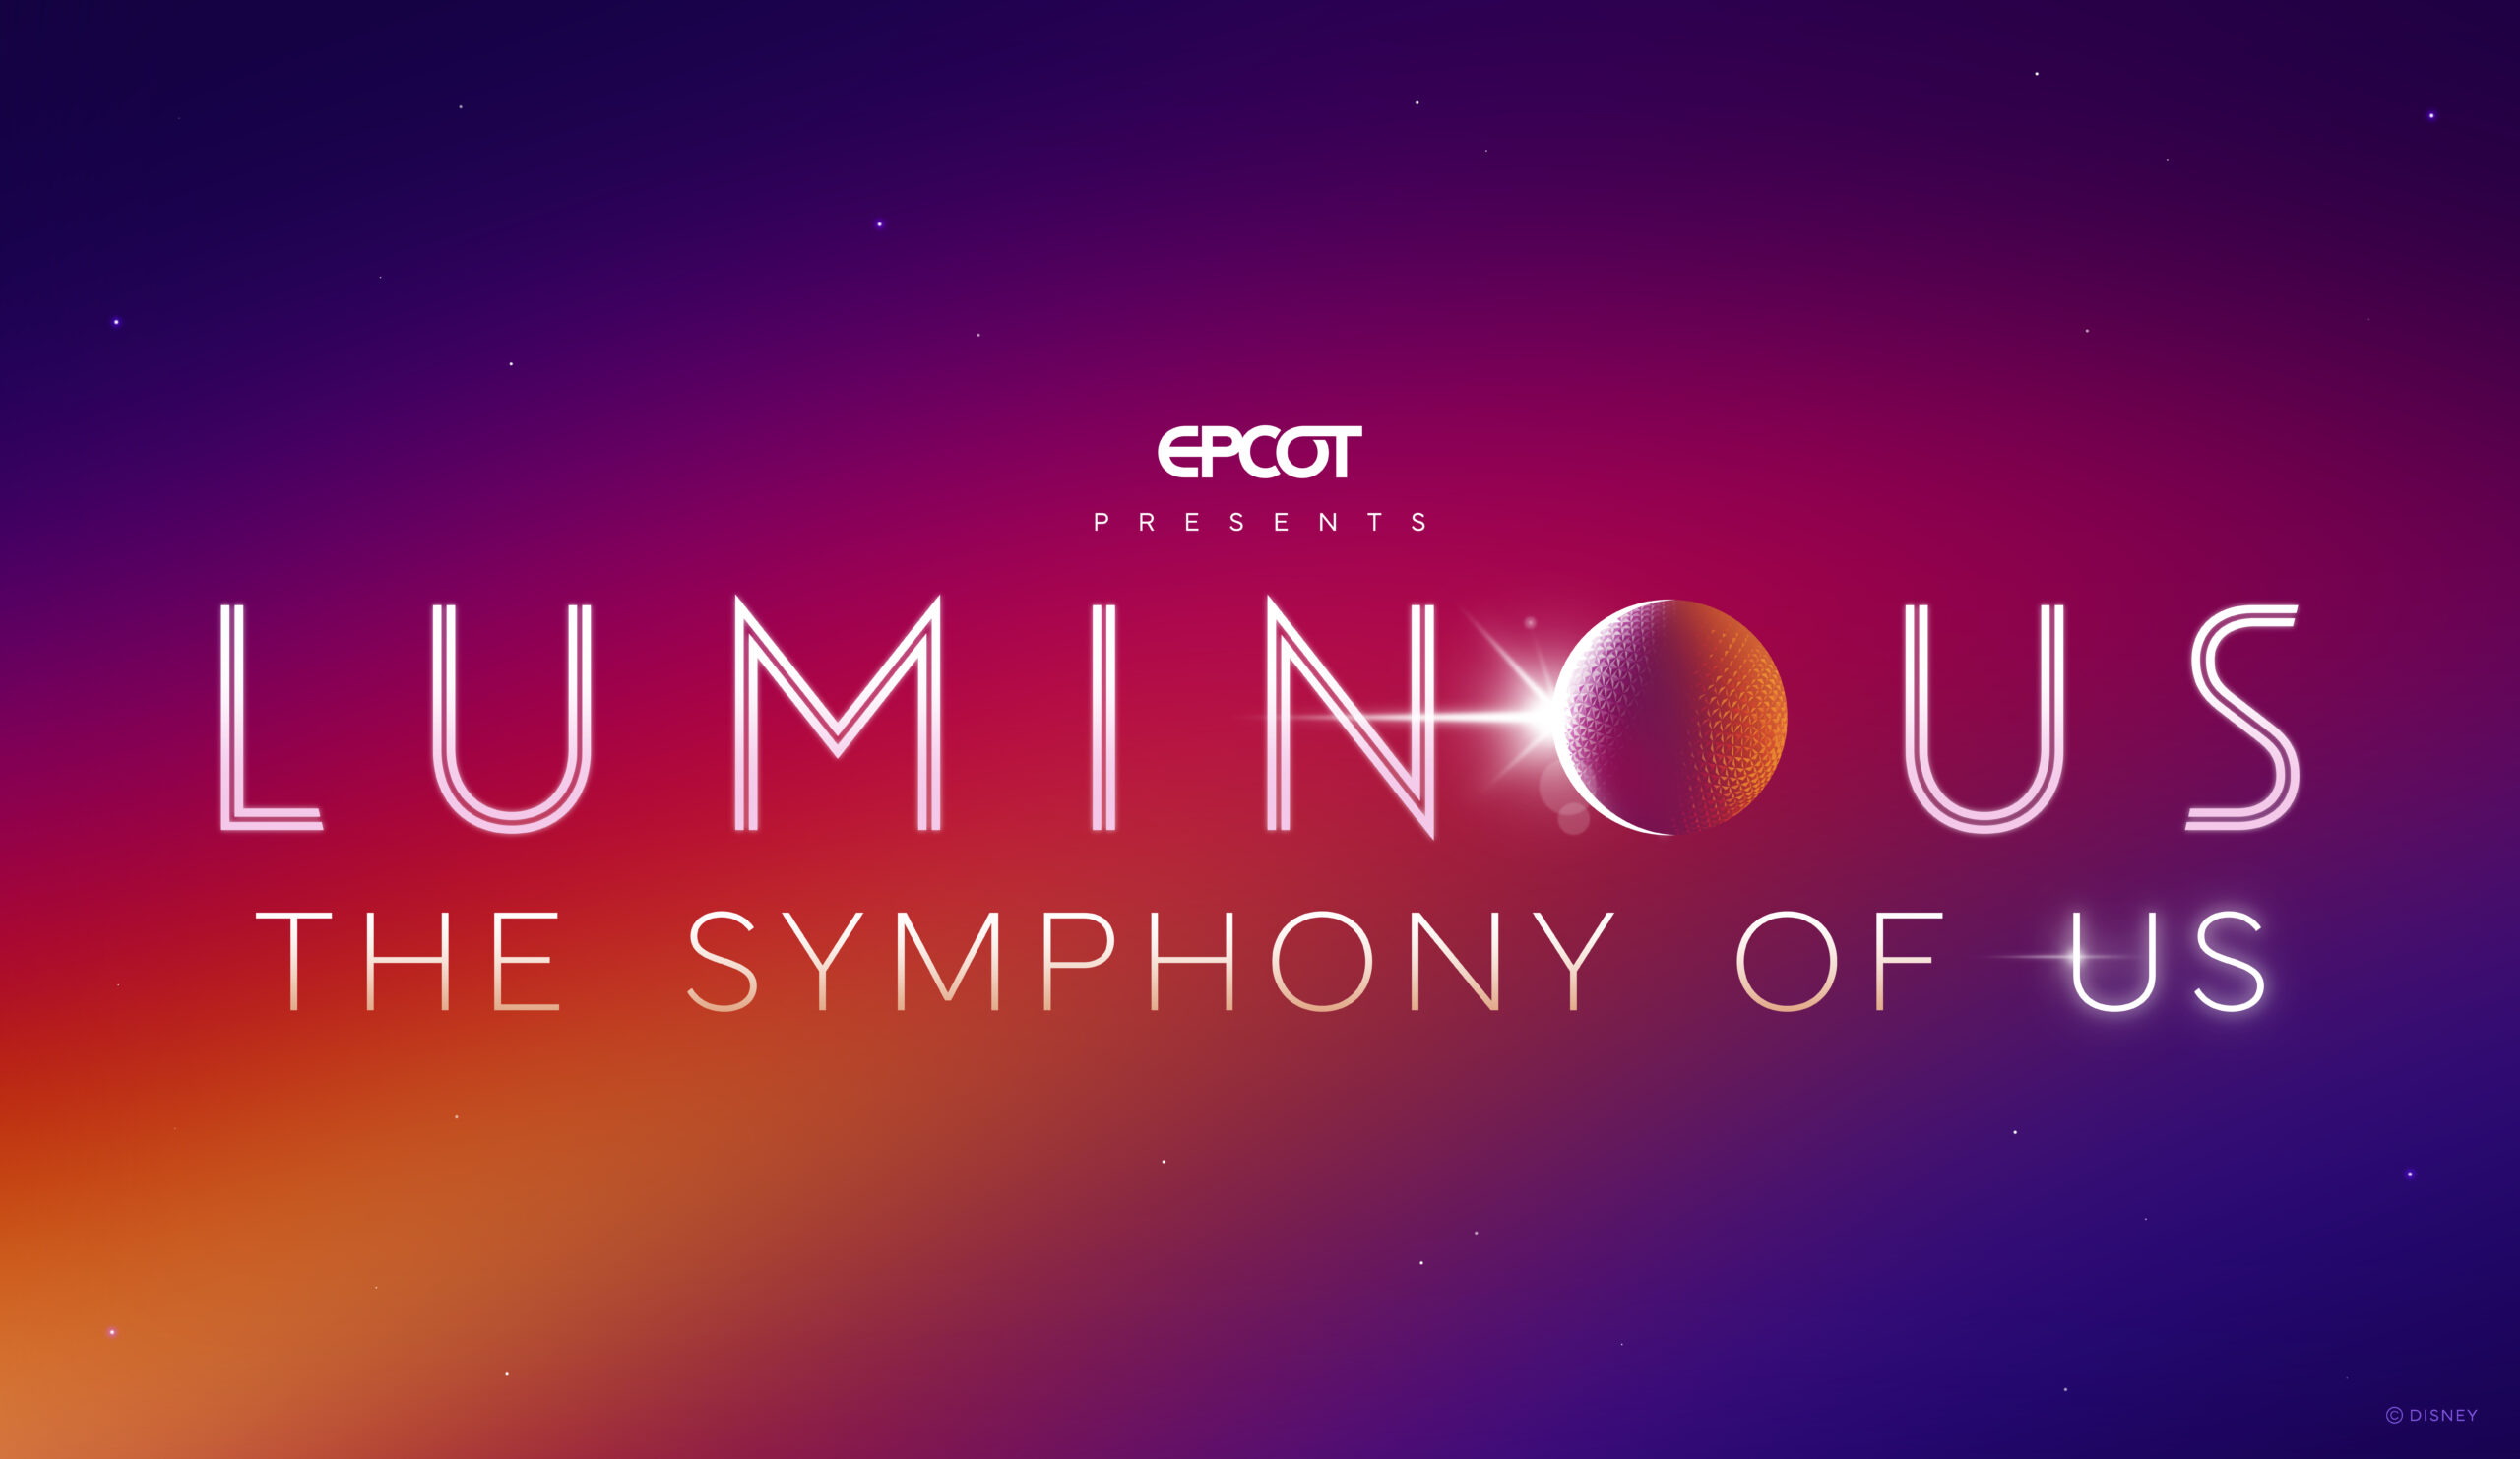 A new nighttime spectacular at EPCOT called “Luminous The Symphony of Us” will debut on Dec. 5, 2023!